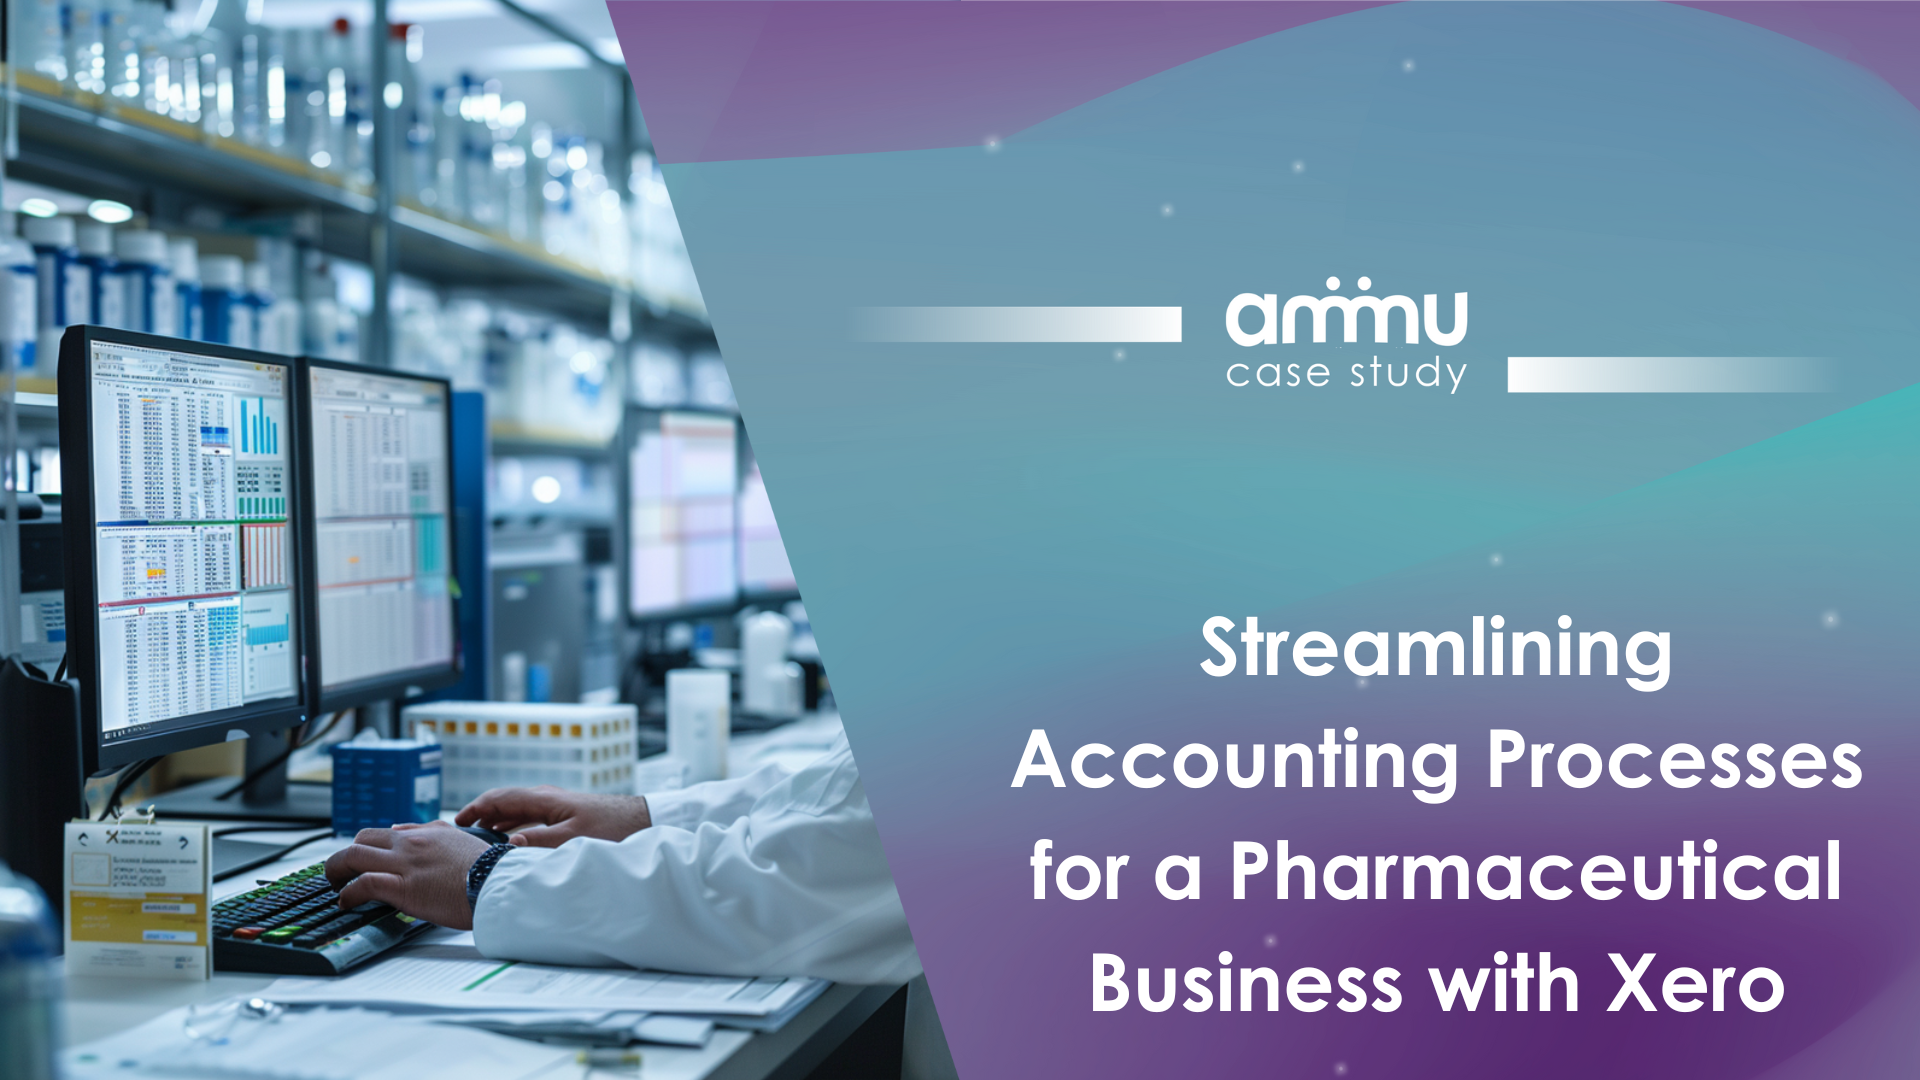 Streamlining Accounting Processes for a Pharmaceutical Business with Xero